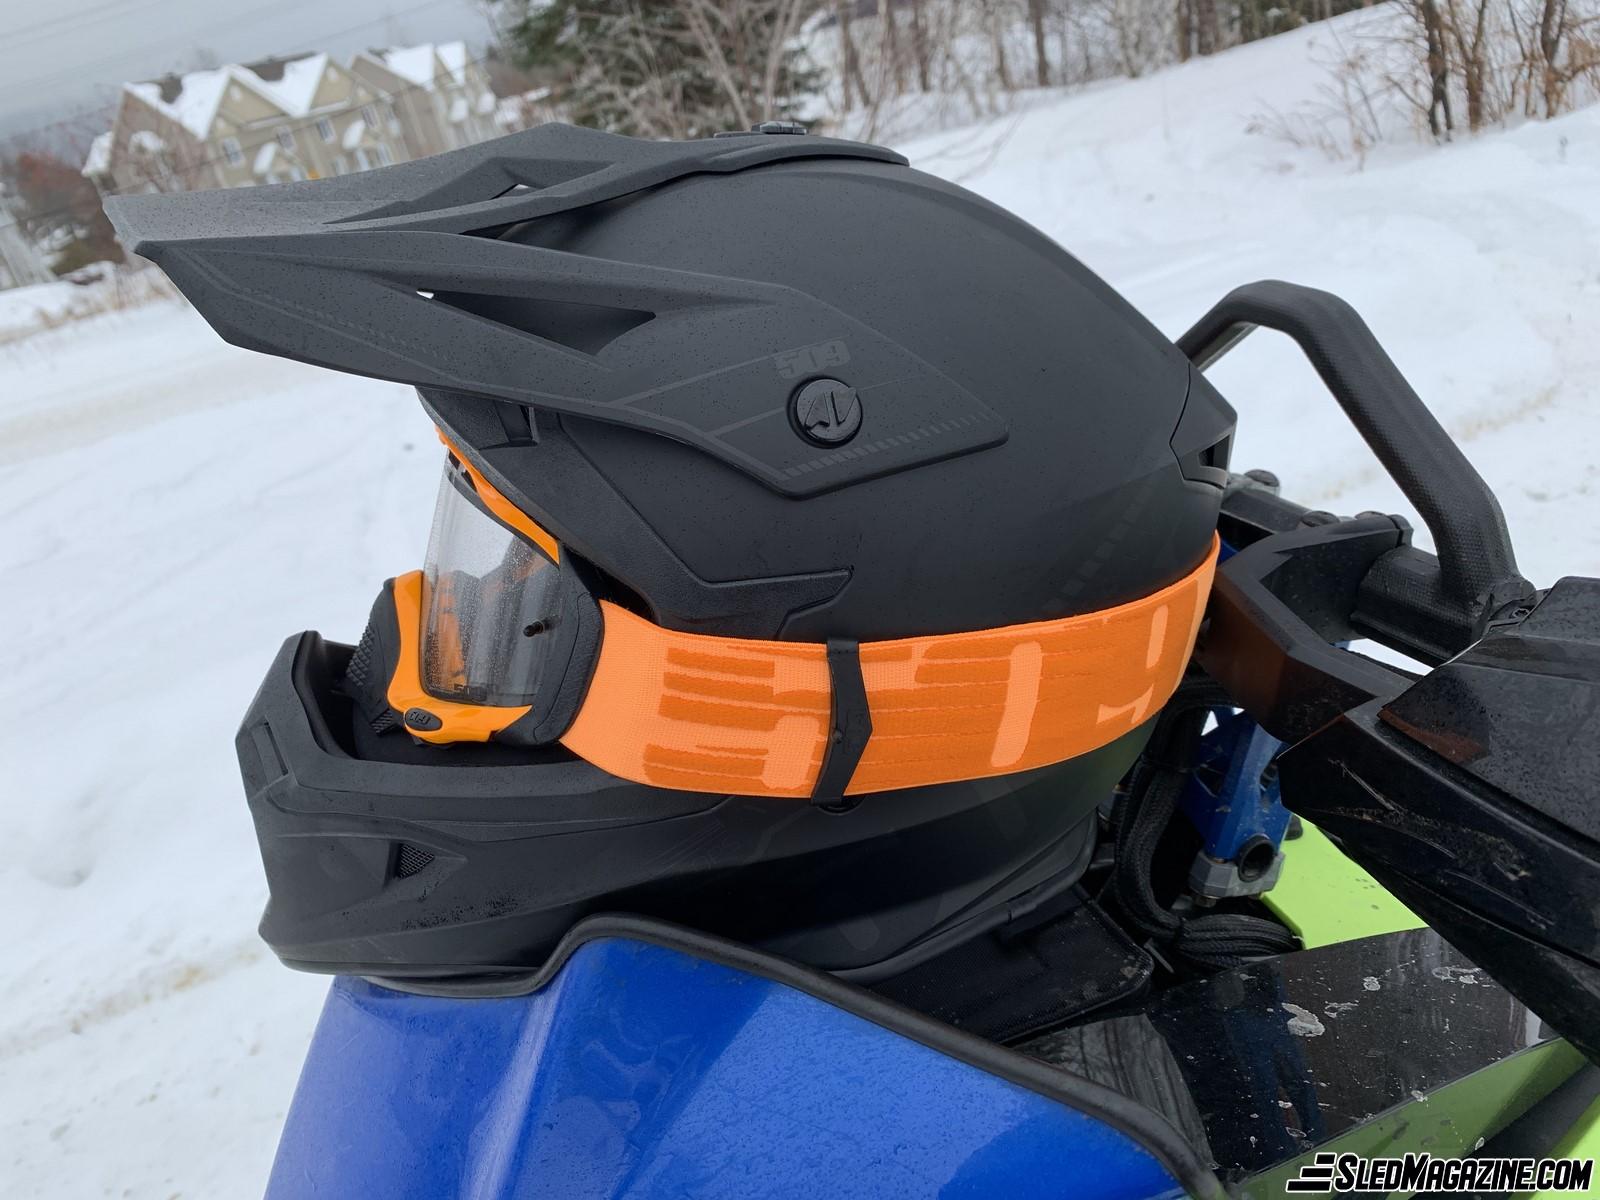 509 Tactical Helmet/Sinister X5 Goggle Combo Trial - Snowmobile - Snowmobiler